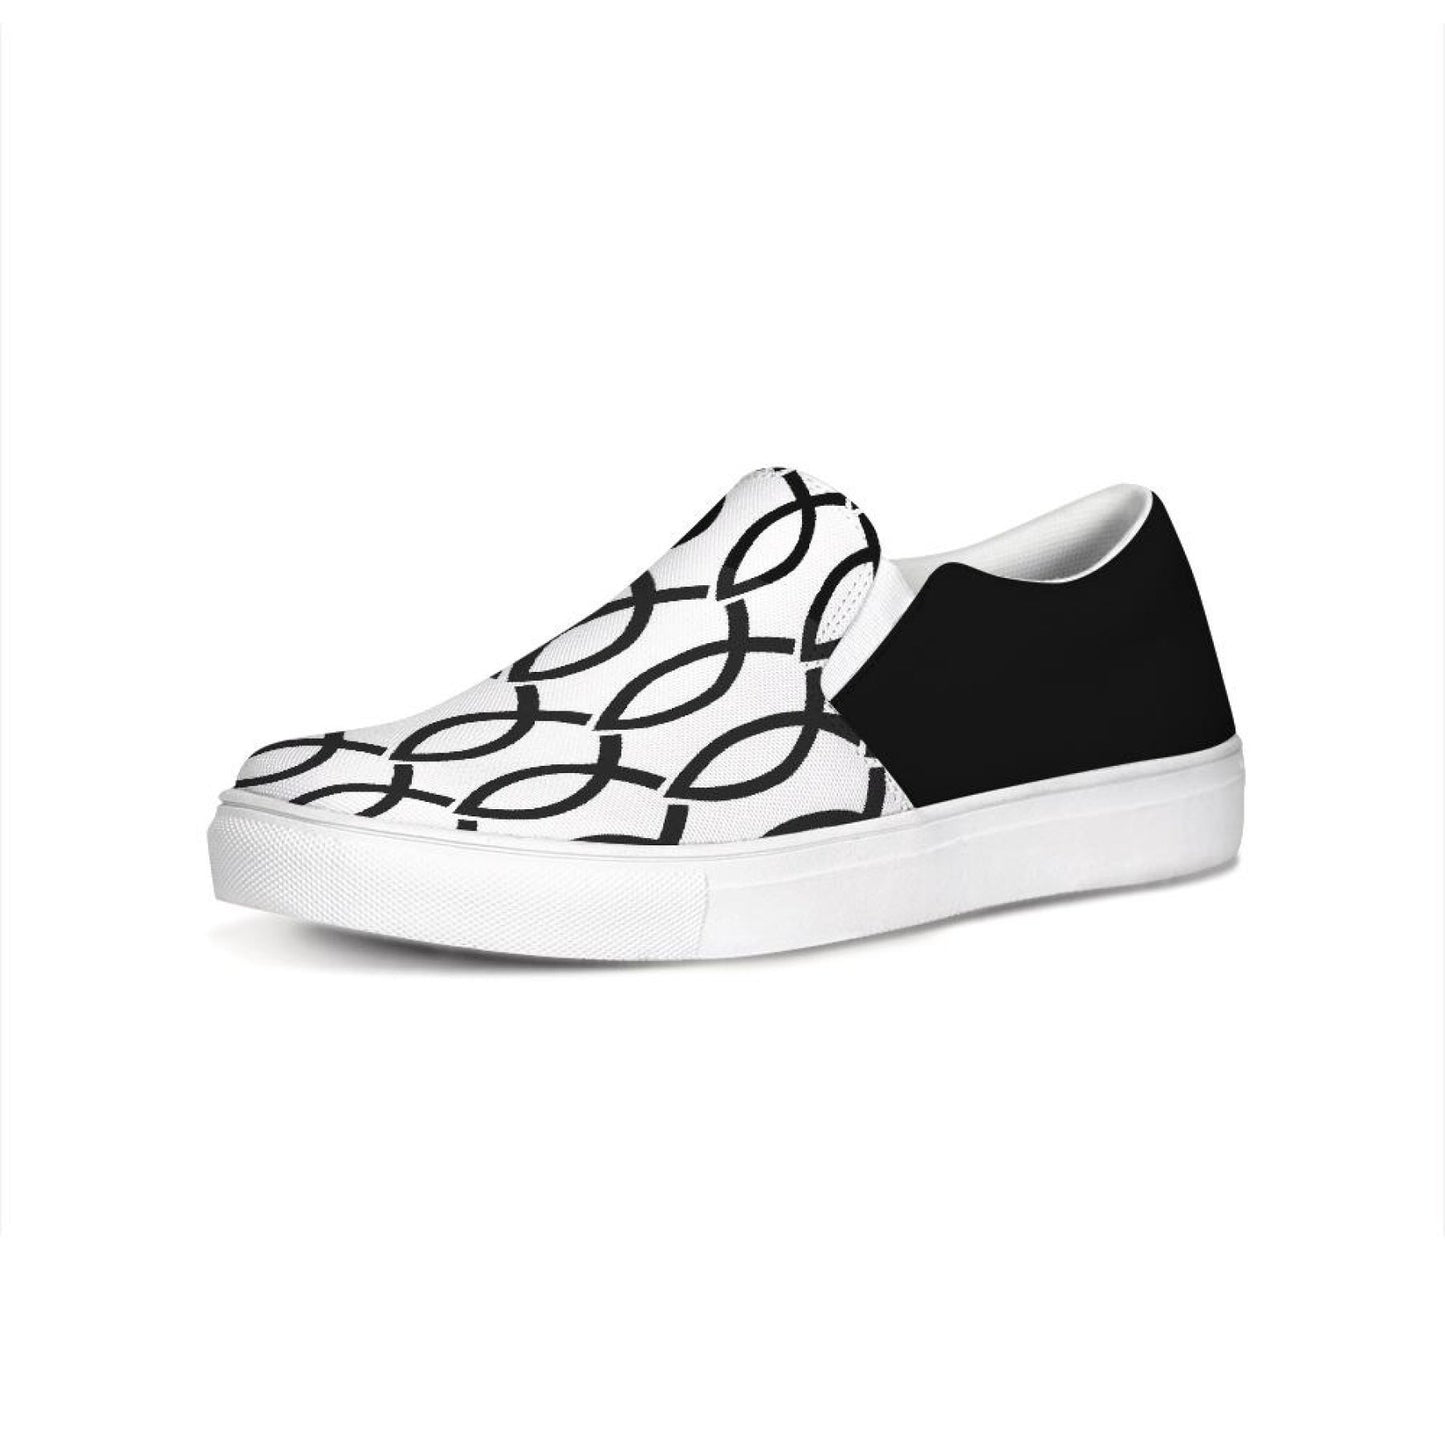 Womens Sneakers - Black & White Ichthys Style Low Top Slip-on Canvas